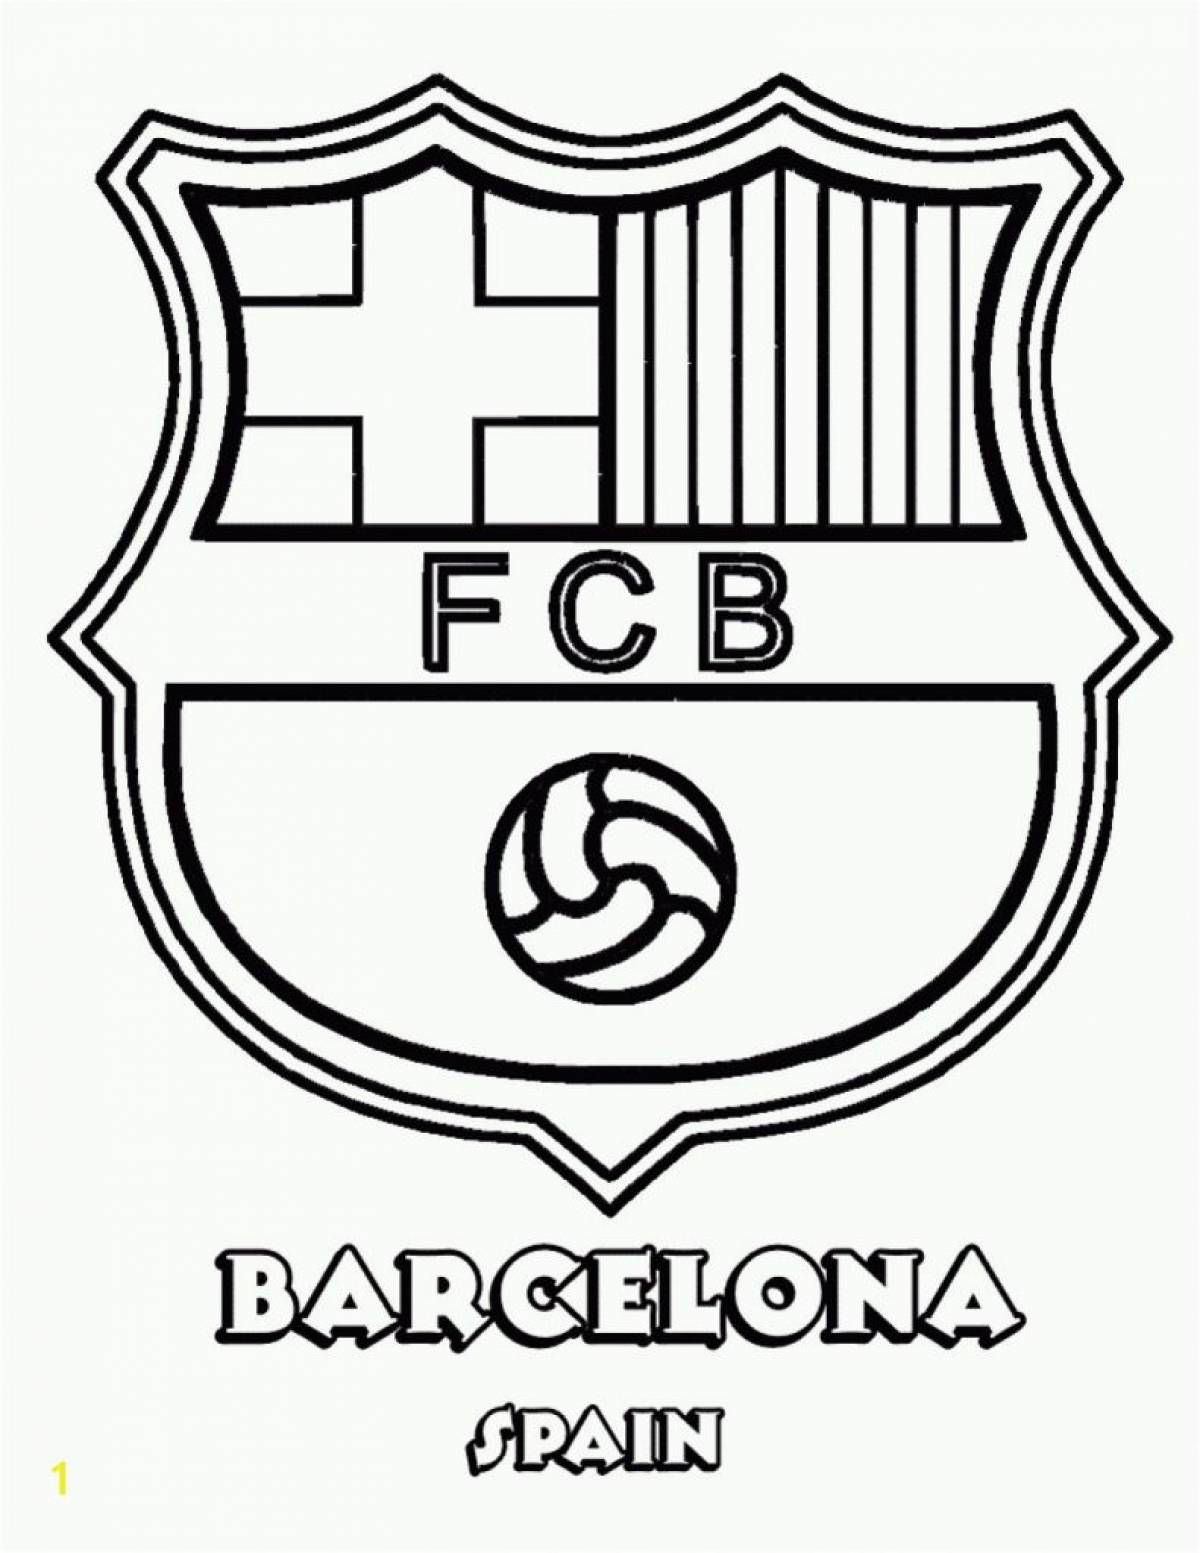 Barcelona football club coloring book colorfully illustrated